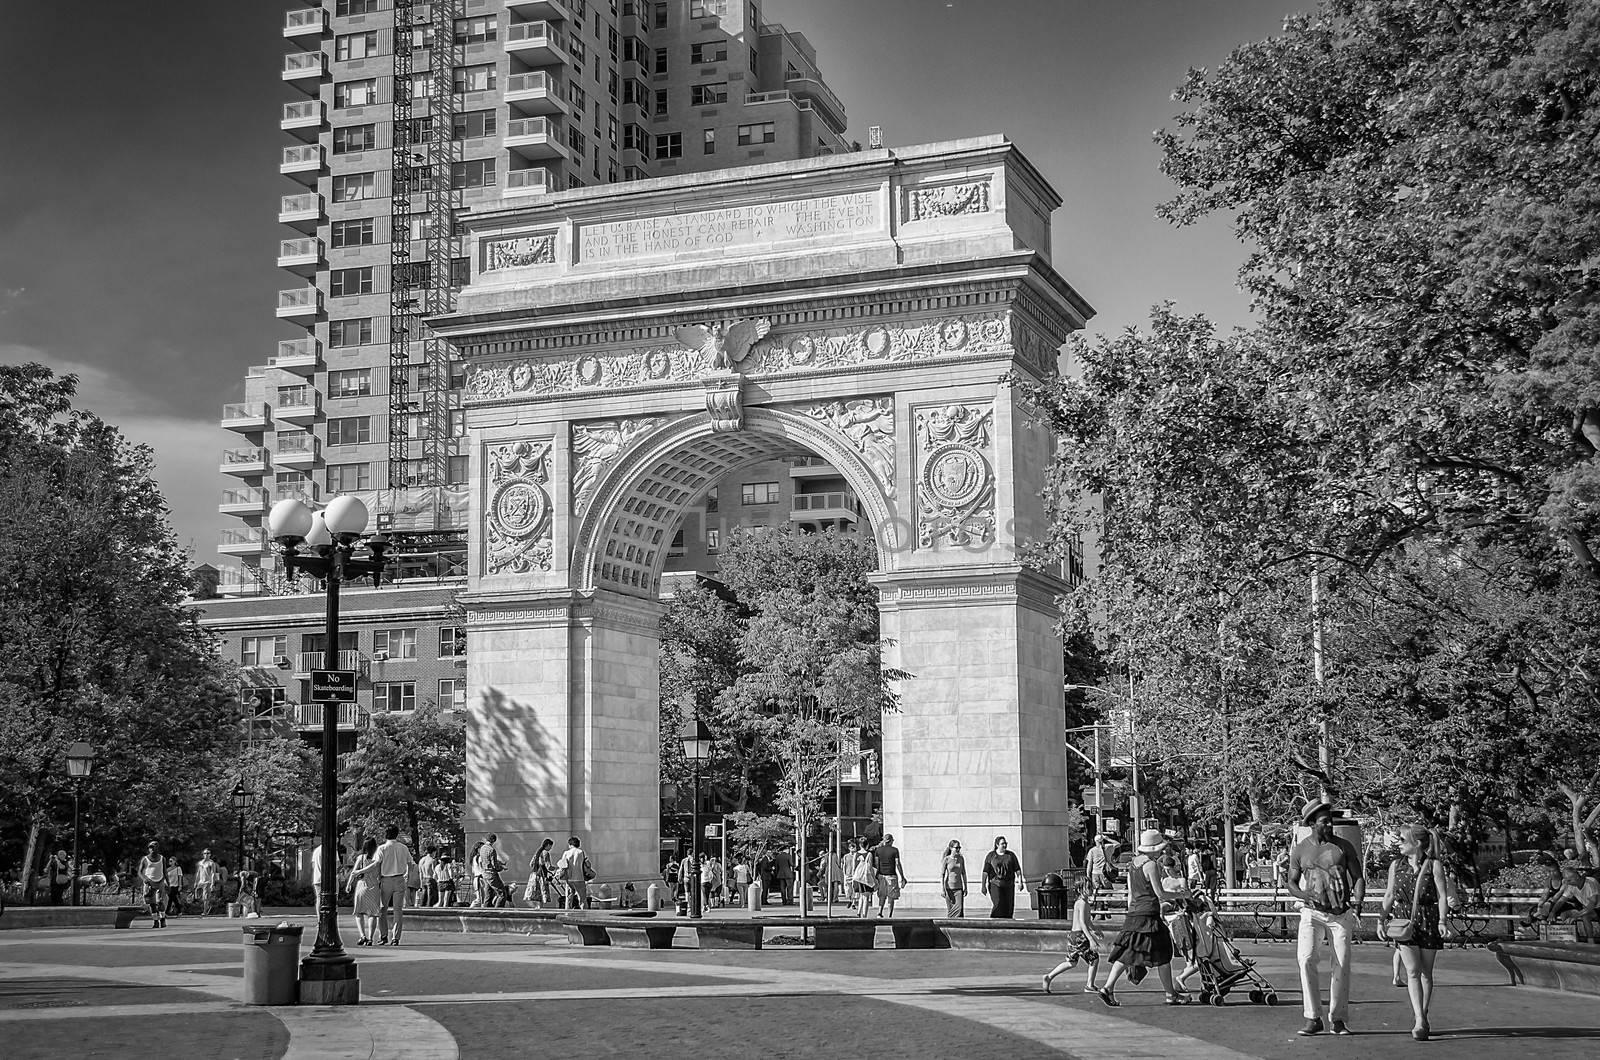 NEW YORK - JUNE 1: Washington Square Arch on June 1, 2013 in New York. The arch was built in 1892 to commemorate George Washington centennial inauguration as president. 